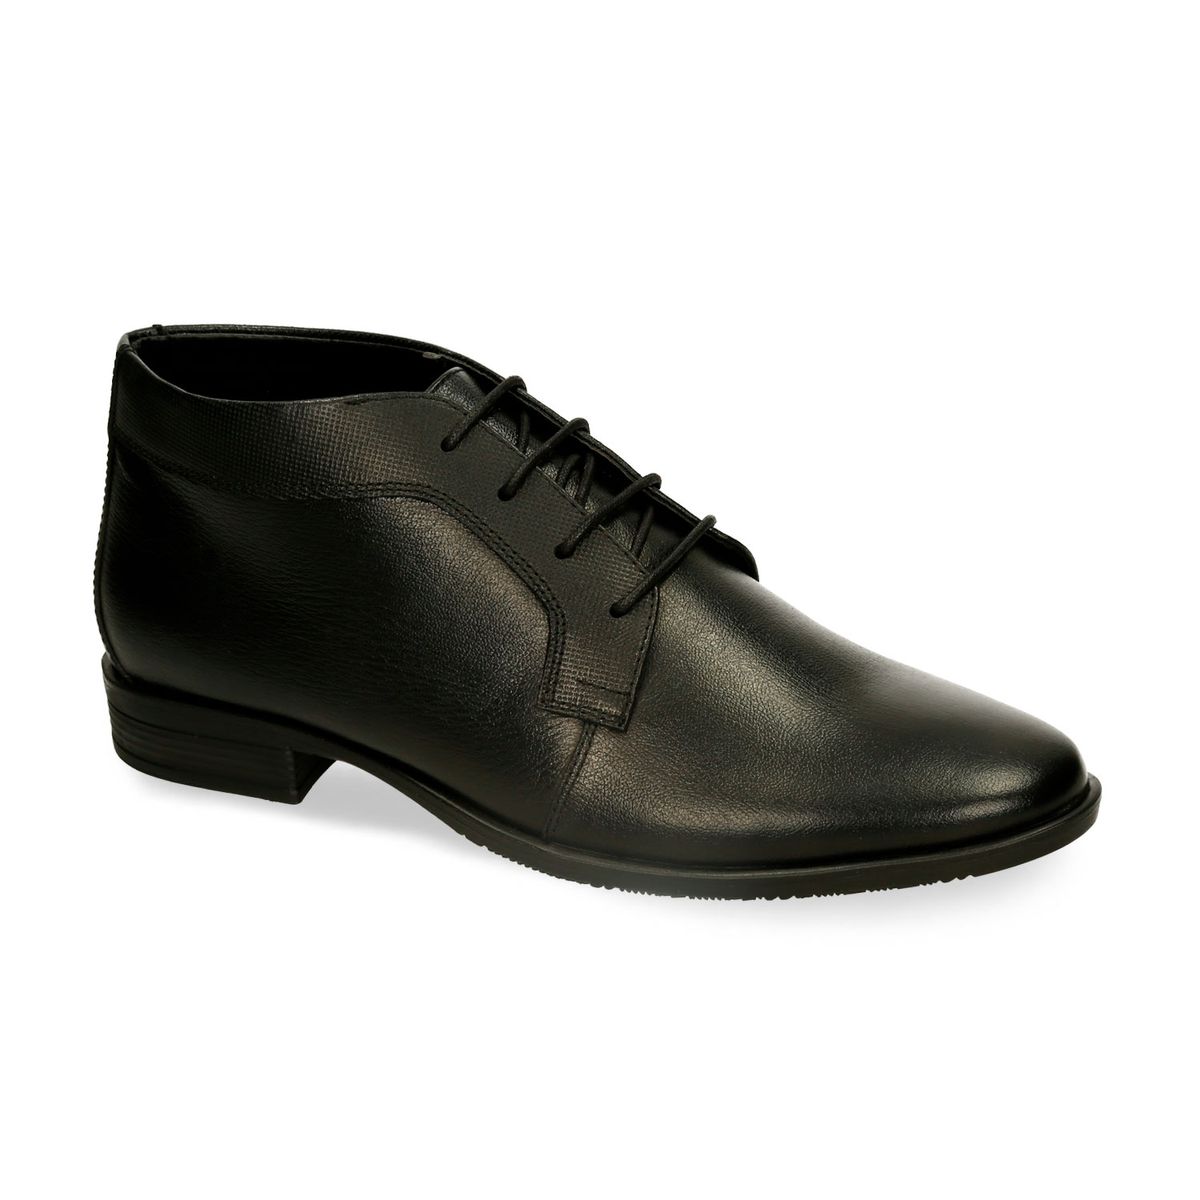 Zapatos Formales Negro Bata Emmerson Boot Hombre